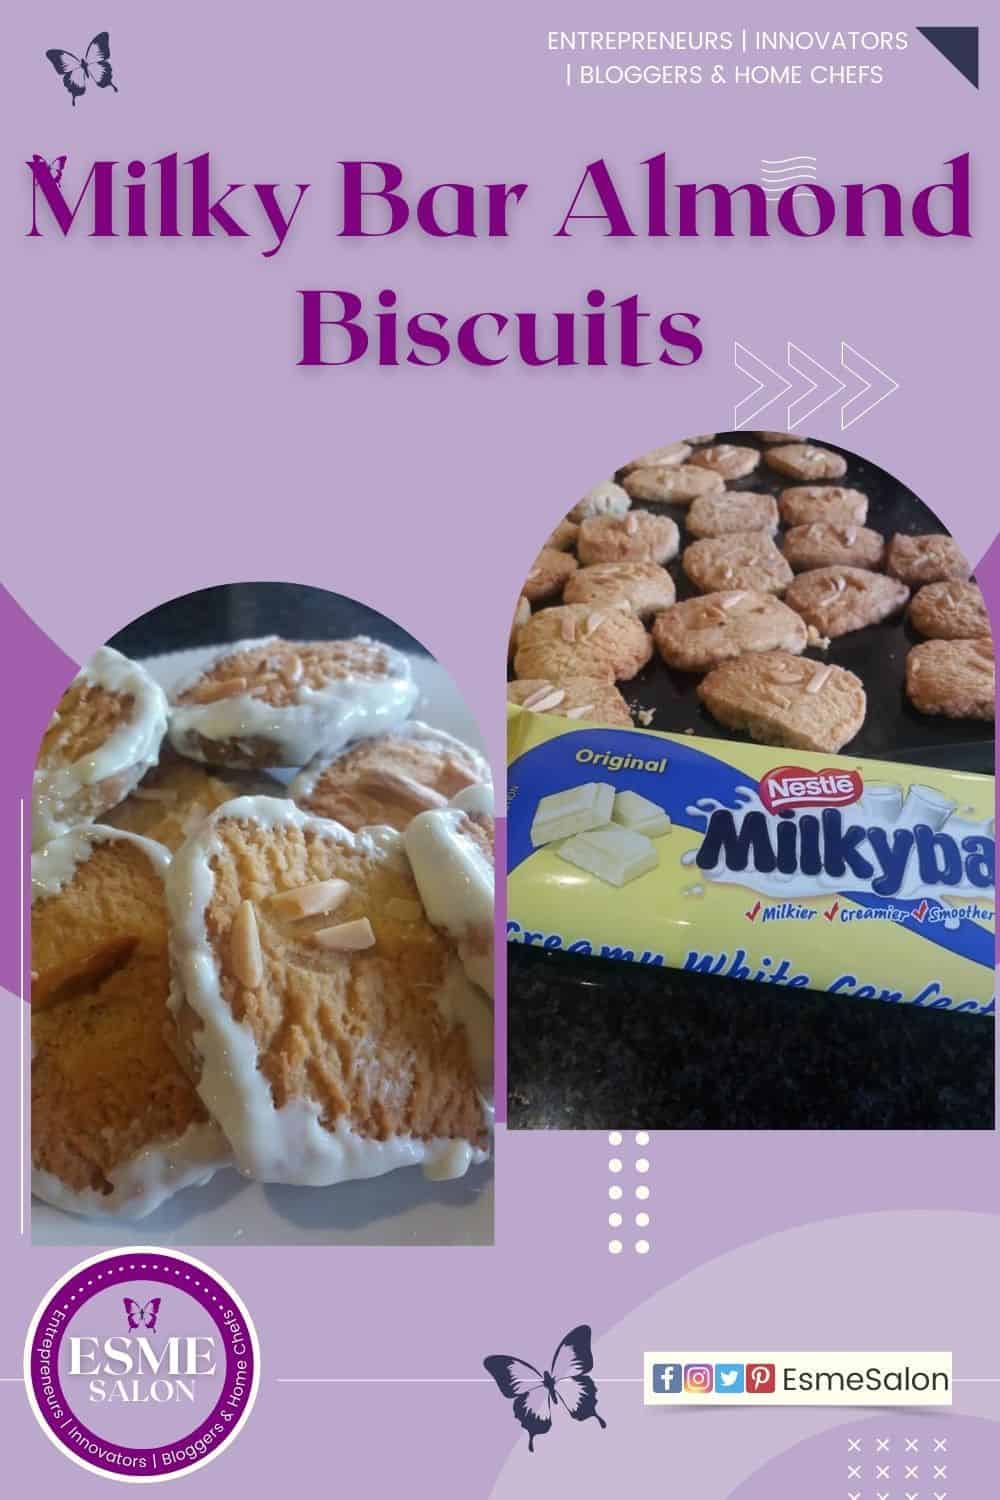 Milky Bar Almond Biscuits in a tin dipped in chocolate and topped with slivered almonds